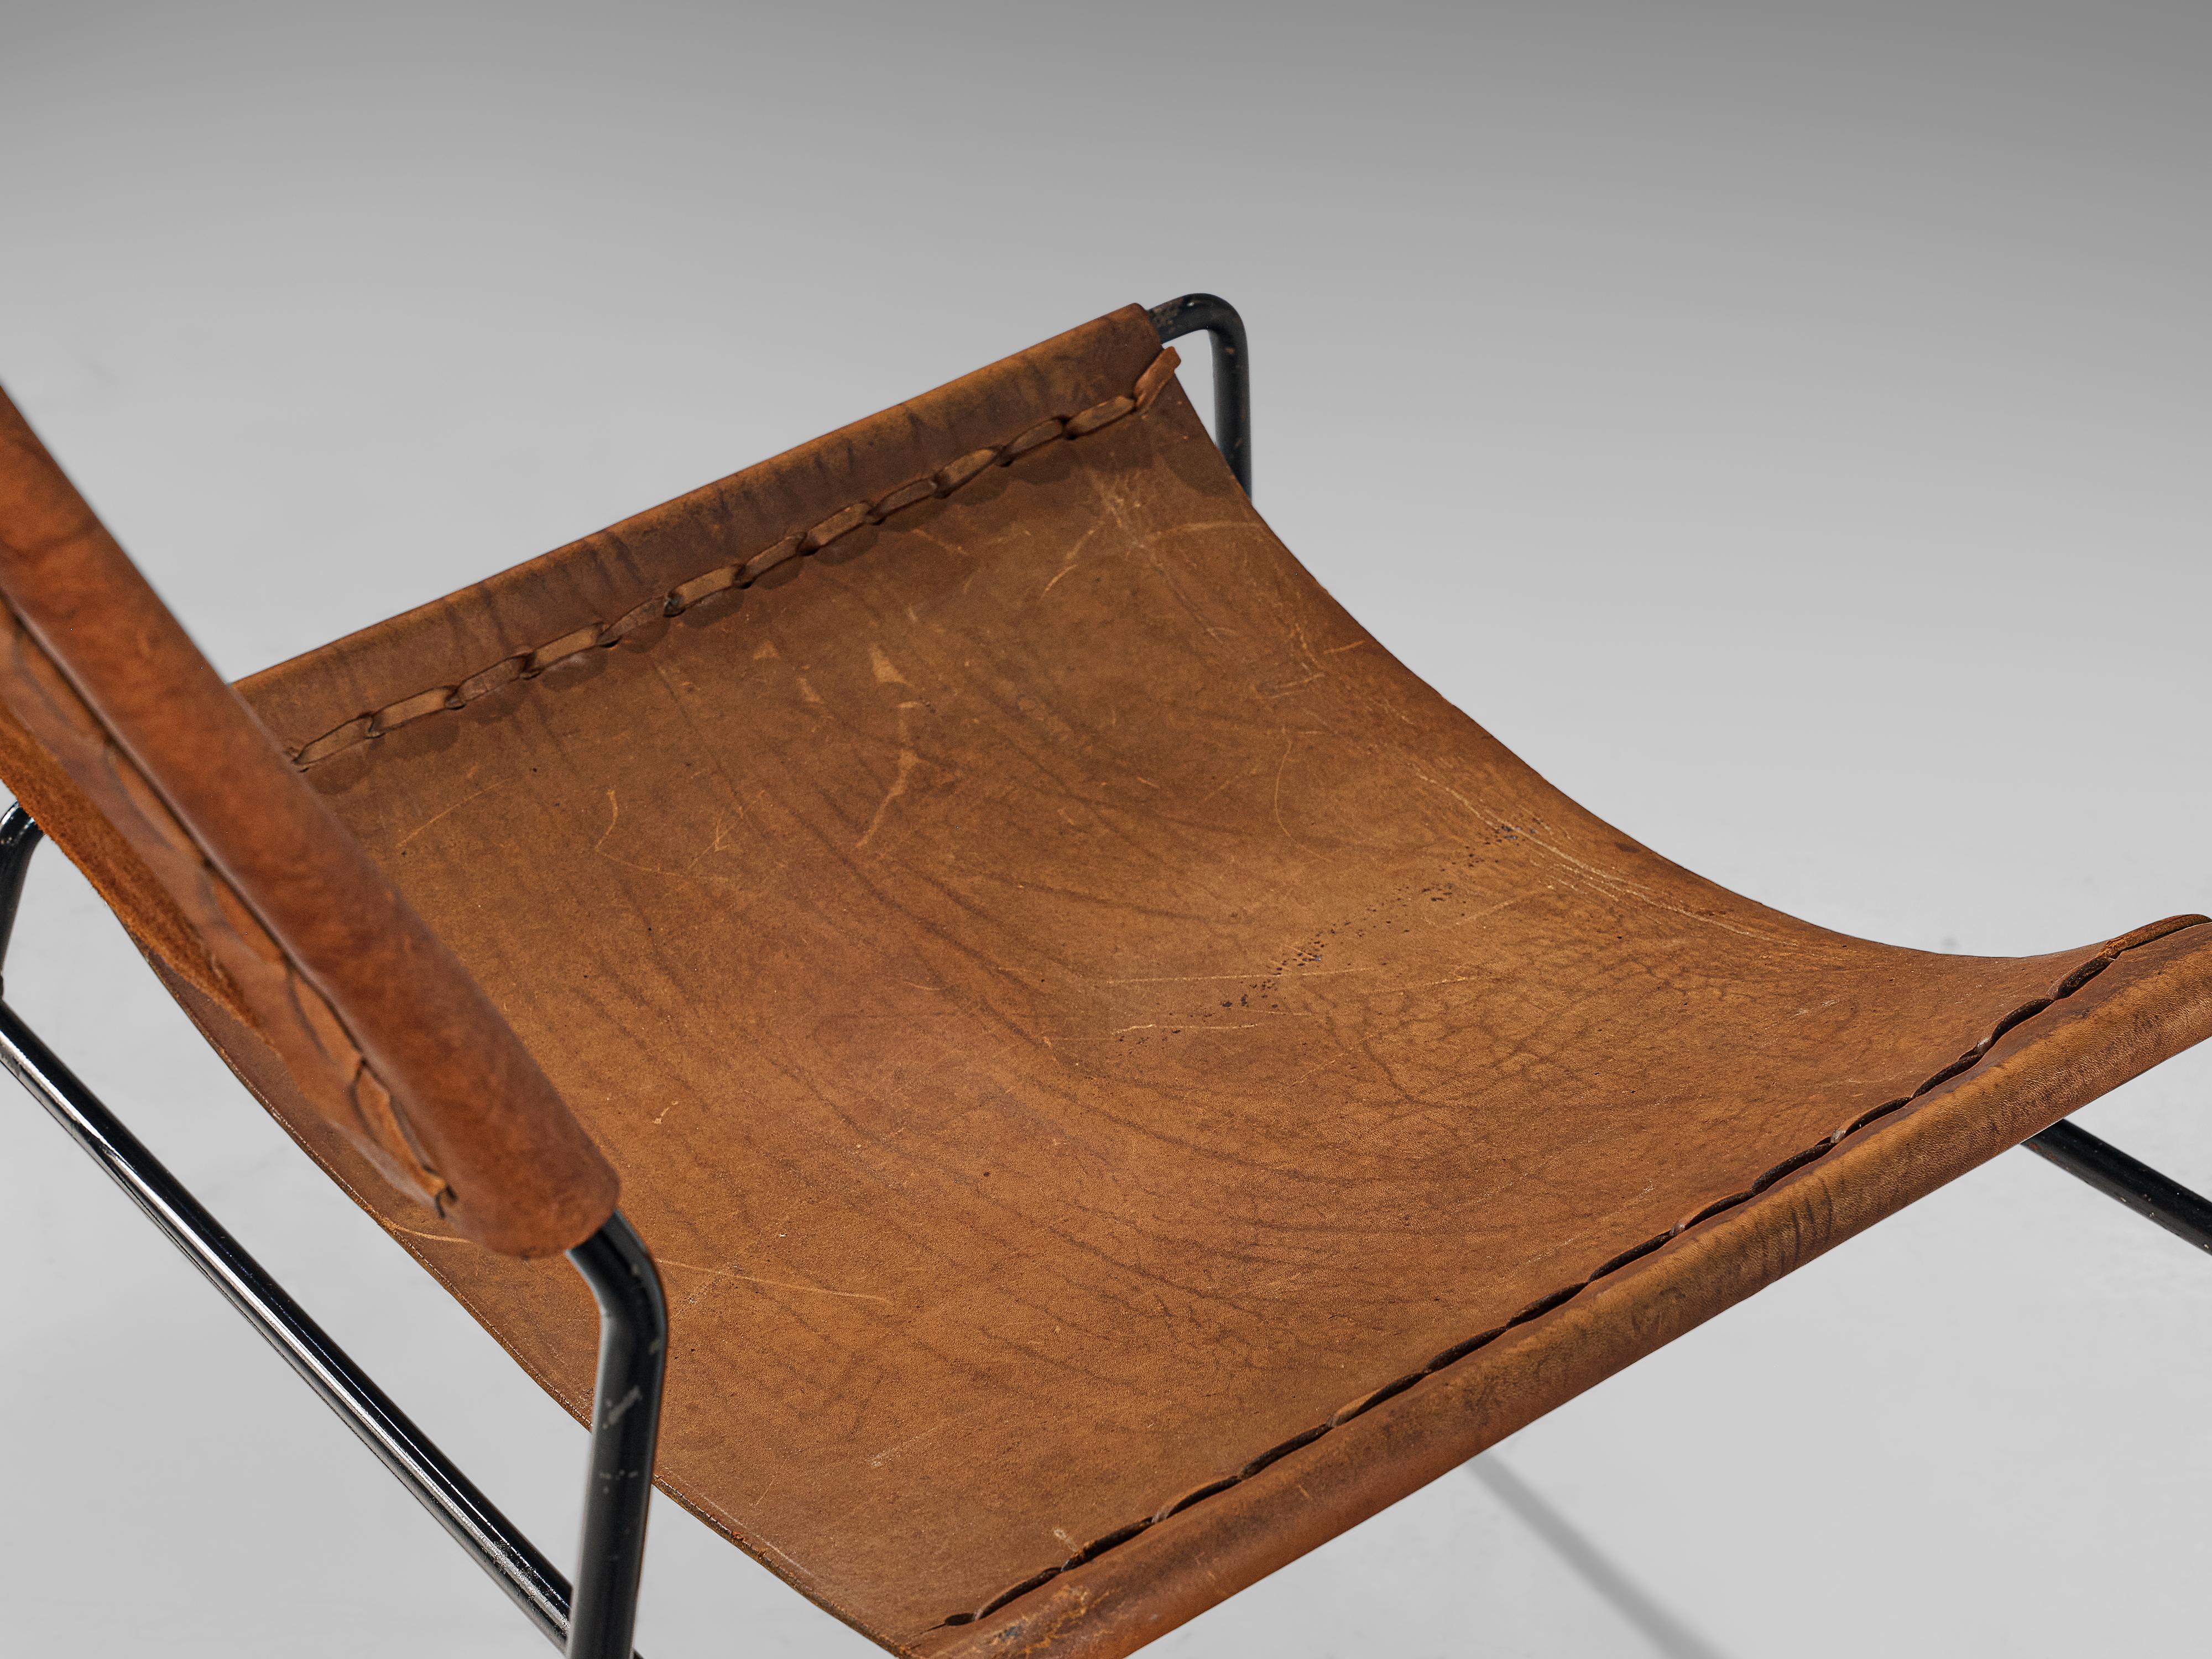 A. Dolleman for Metz & Co Pair of Modernist Easy Chairs in Brown Leather